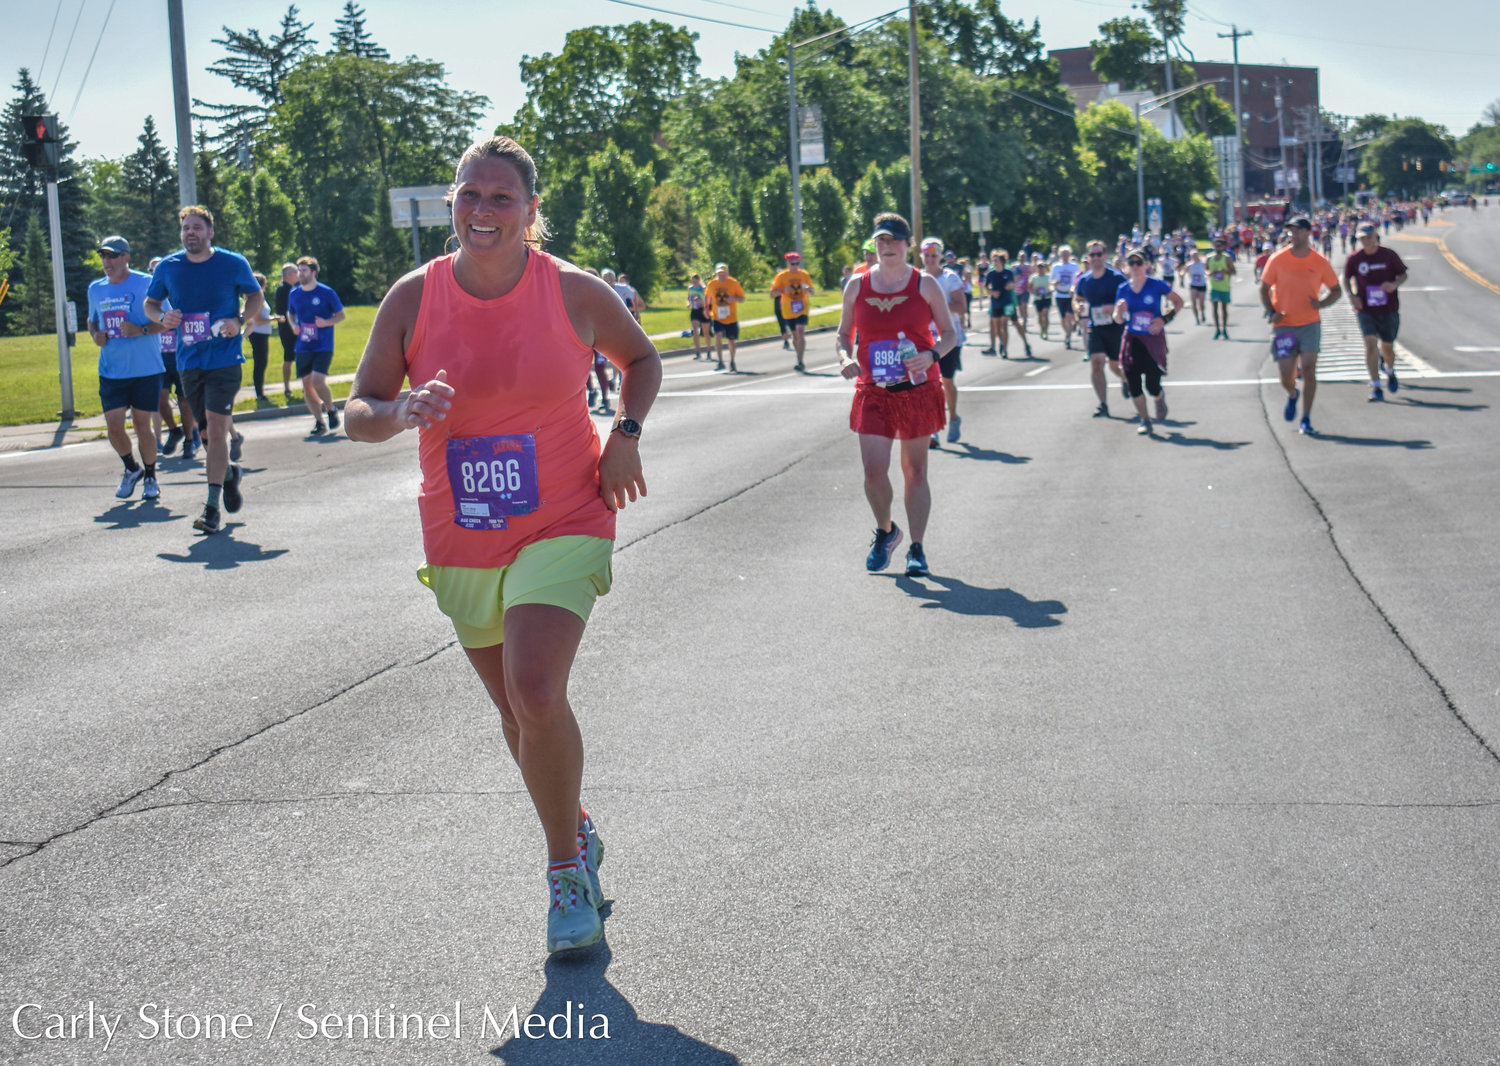 The 2022 Boilermaker took place on Sunday, July 10 in Utica.